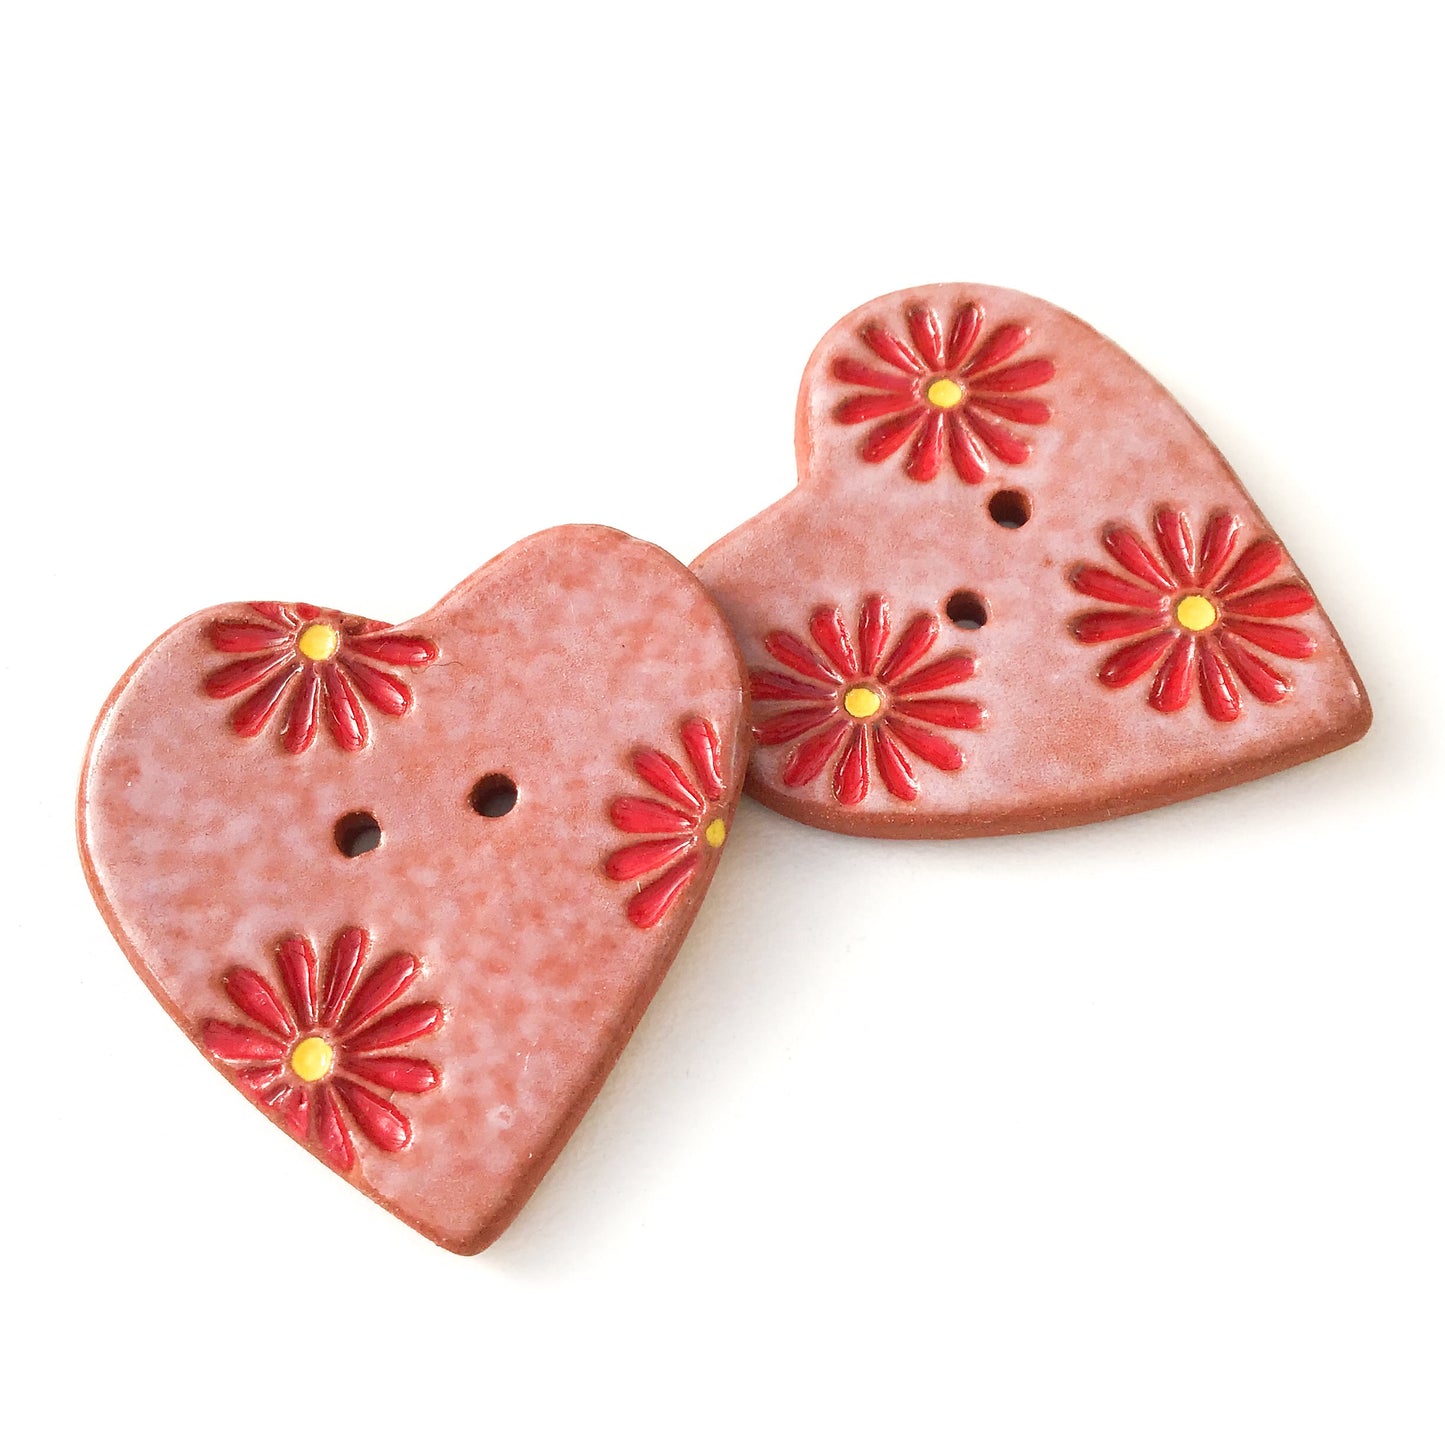 Decorative Heart Buttons - Ceramic Heart Button - Red Daisies - 1 3/8"